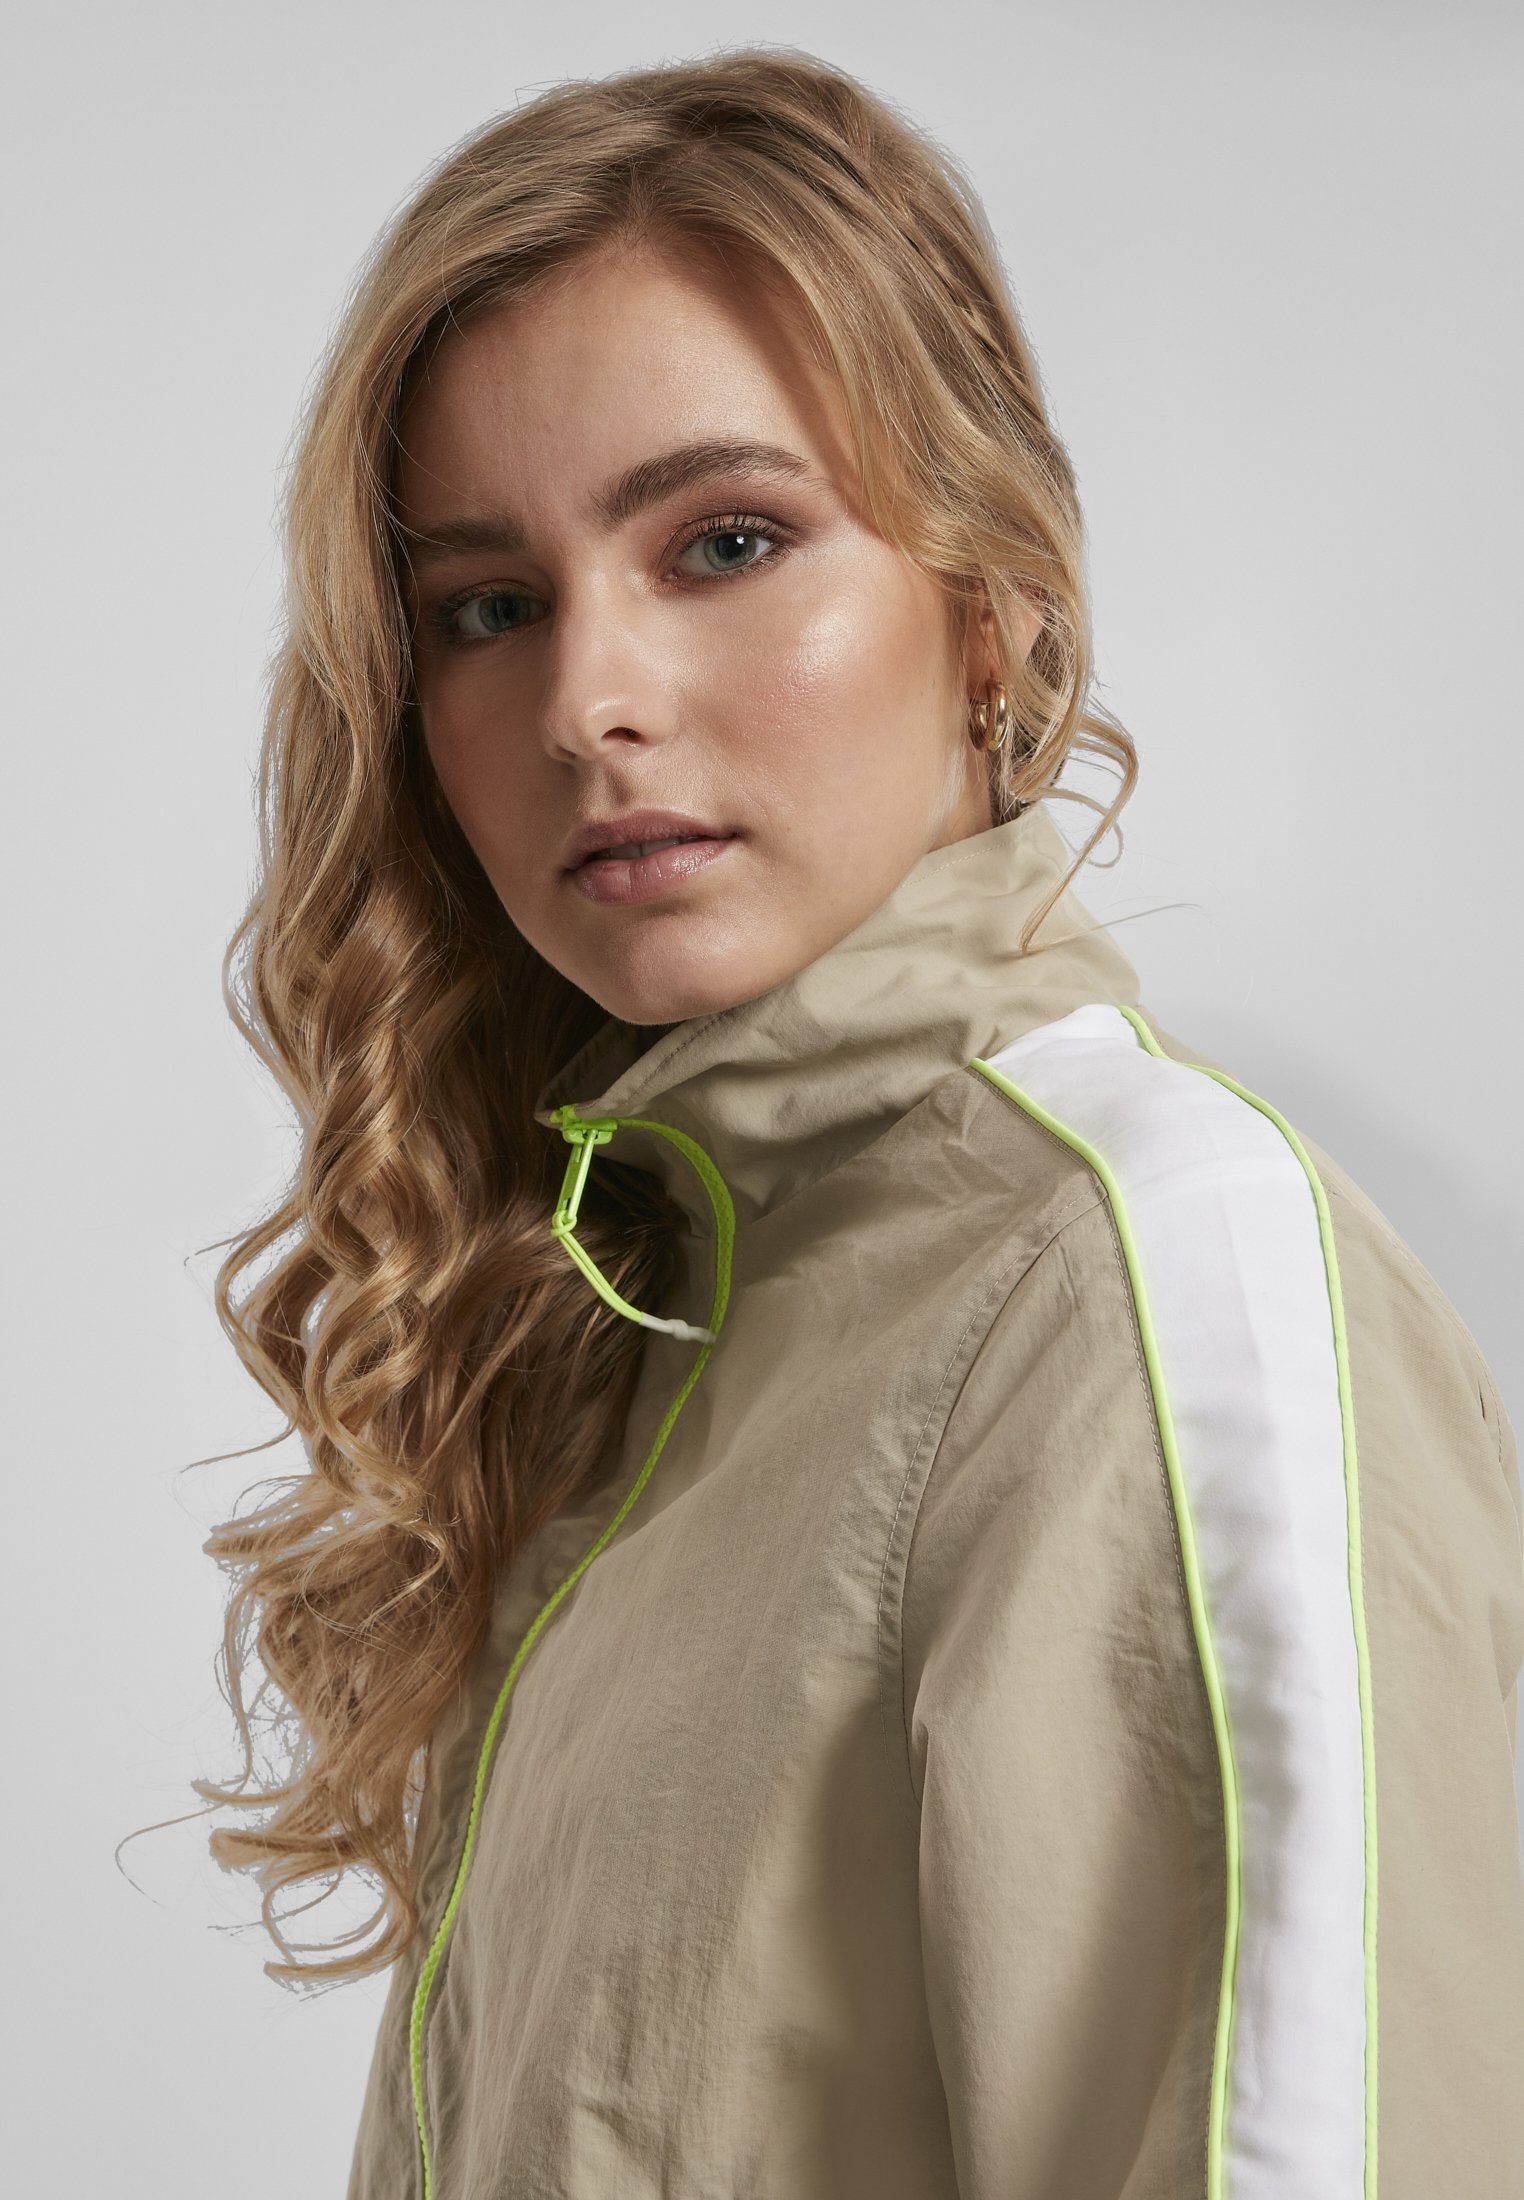 Track CLASSICS concrete/electriclime Jacket Piped Short (1-St) Damen Outdoorjacke Ladies URBAN